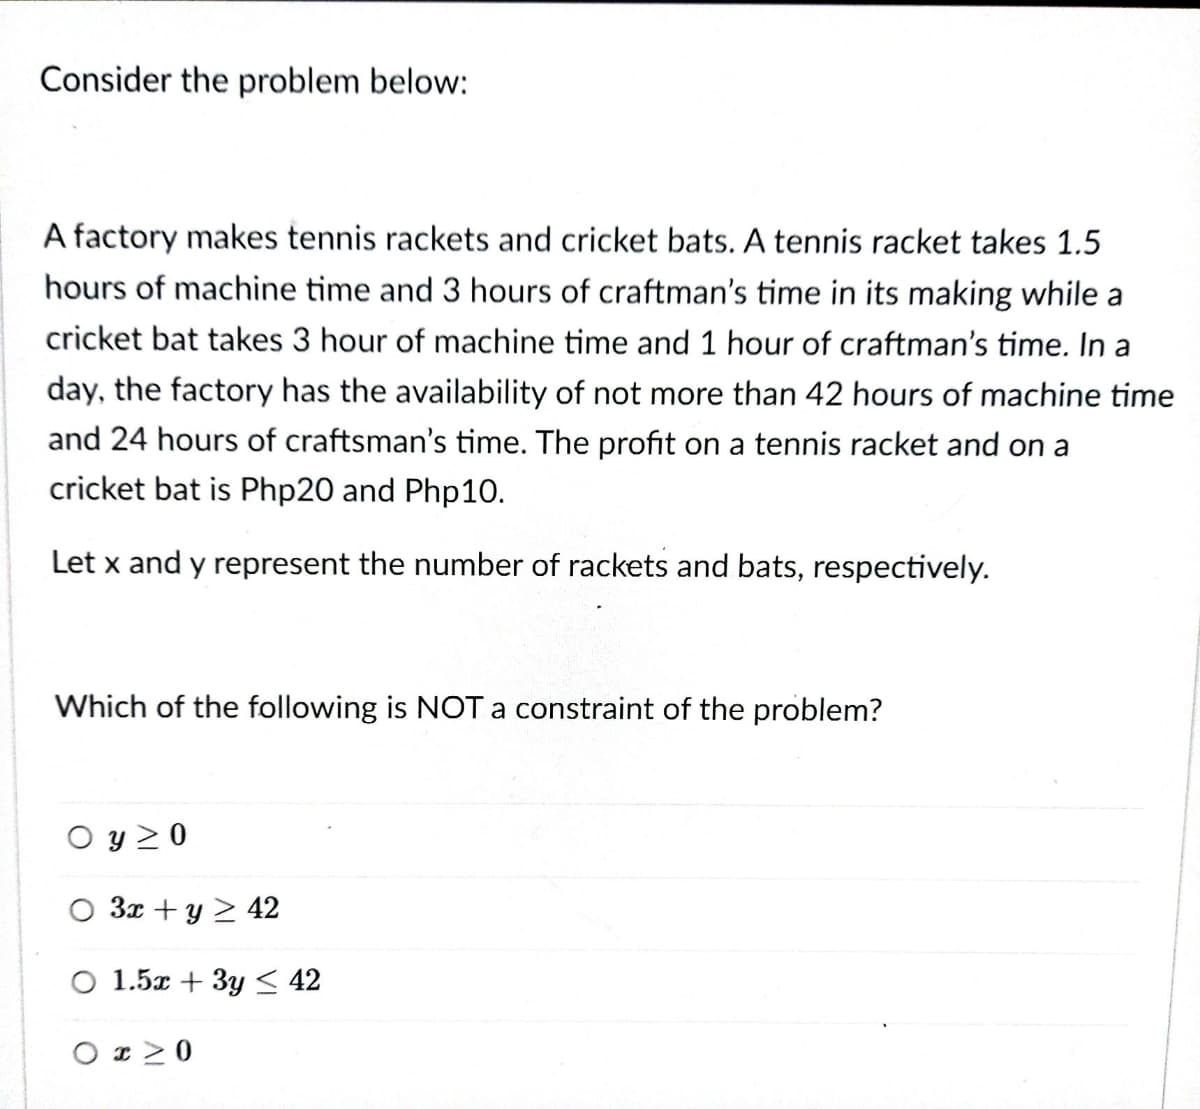 Consider the problem below:
A factory makes tennis rackets and cricket bats. A tennis racket takes 1.5
hours of machine time and 3 hours of craftman's time in its making while a
cricket bat takes 3 hour of machine time and 1 hour of craftman's time. In a
day, the factory has the availability of not more than 42 hours of machine time
and 24 hours of craftsman's time. The profit on a tennis racket and on a
cricket bat is Php20 and Php10.
Let x and y represent the number of rackets and bats, respectively.
Which of the following is NOT a constraint of the problem?
O y 2 0
O 3x + y 2 42
O 1.5x + 3y < 42
O r20
